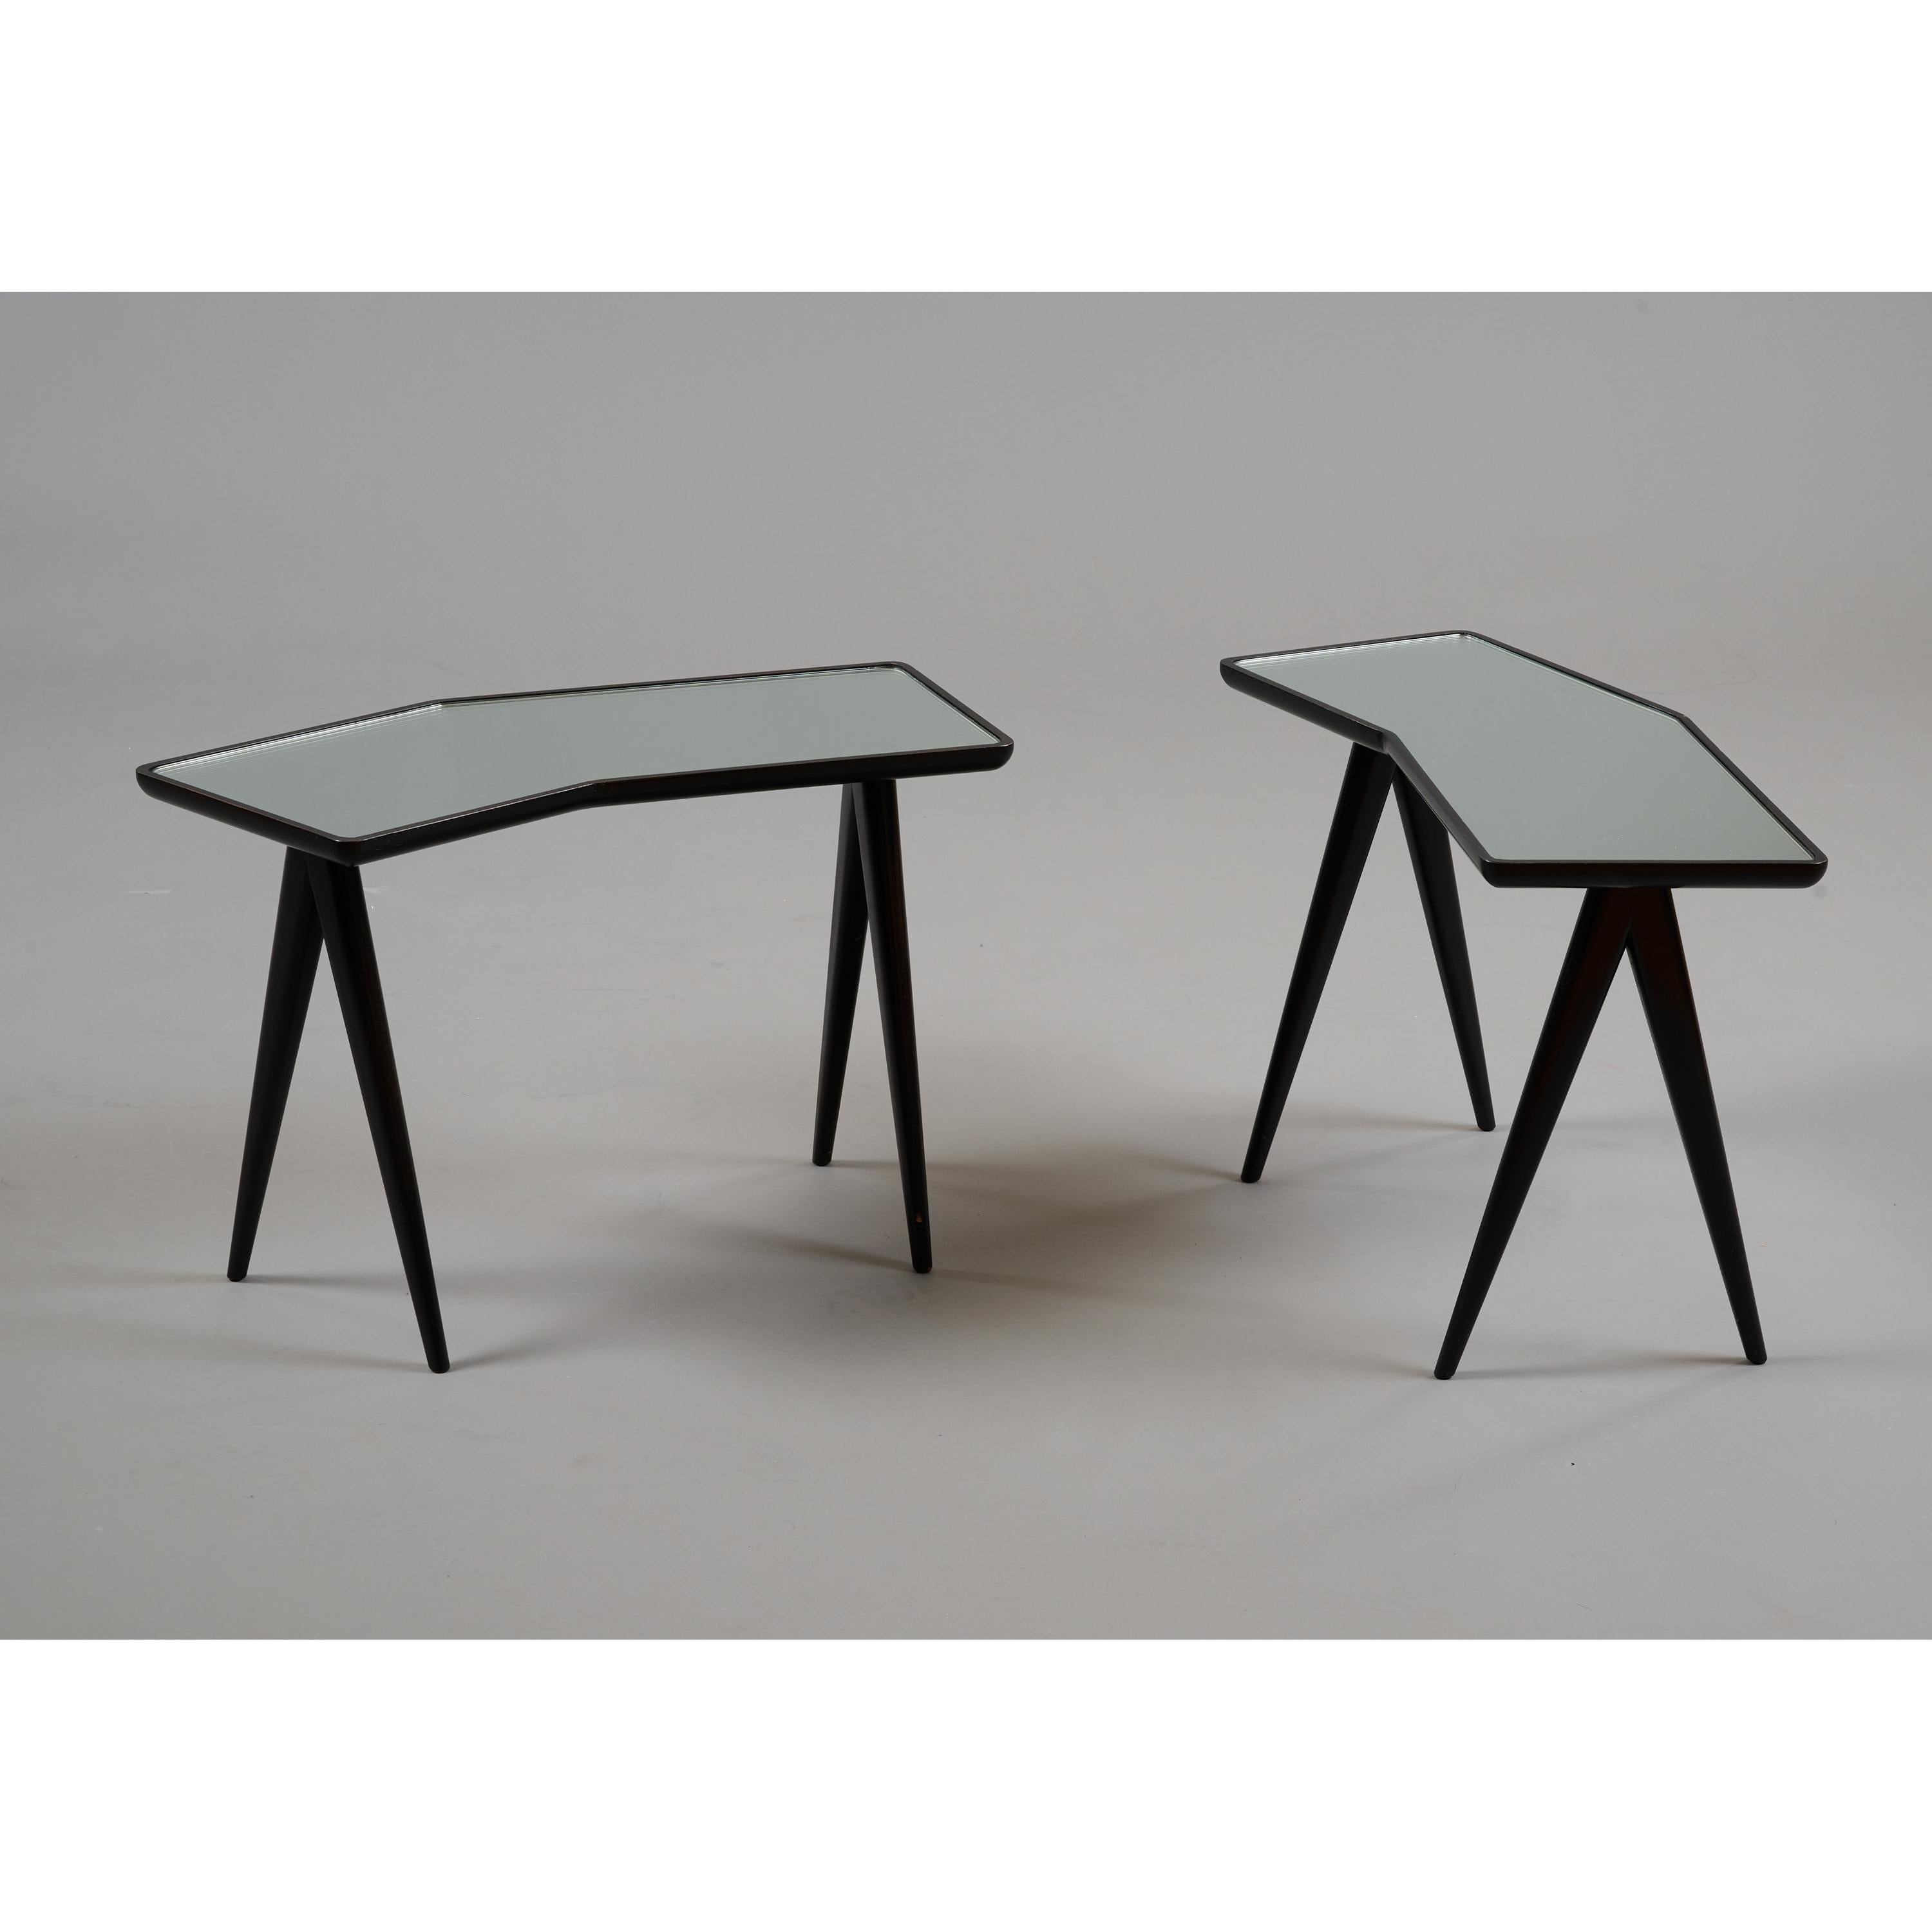 Gio Ponti Pair of Geometric Nesting Tables with Mirrored Tops, Italy, 1950's For Sale 4